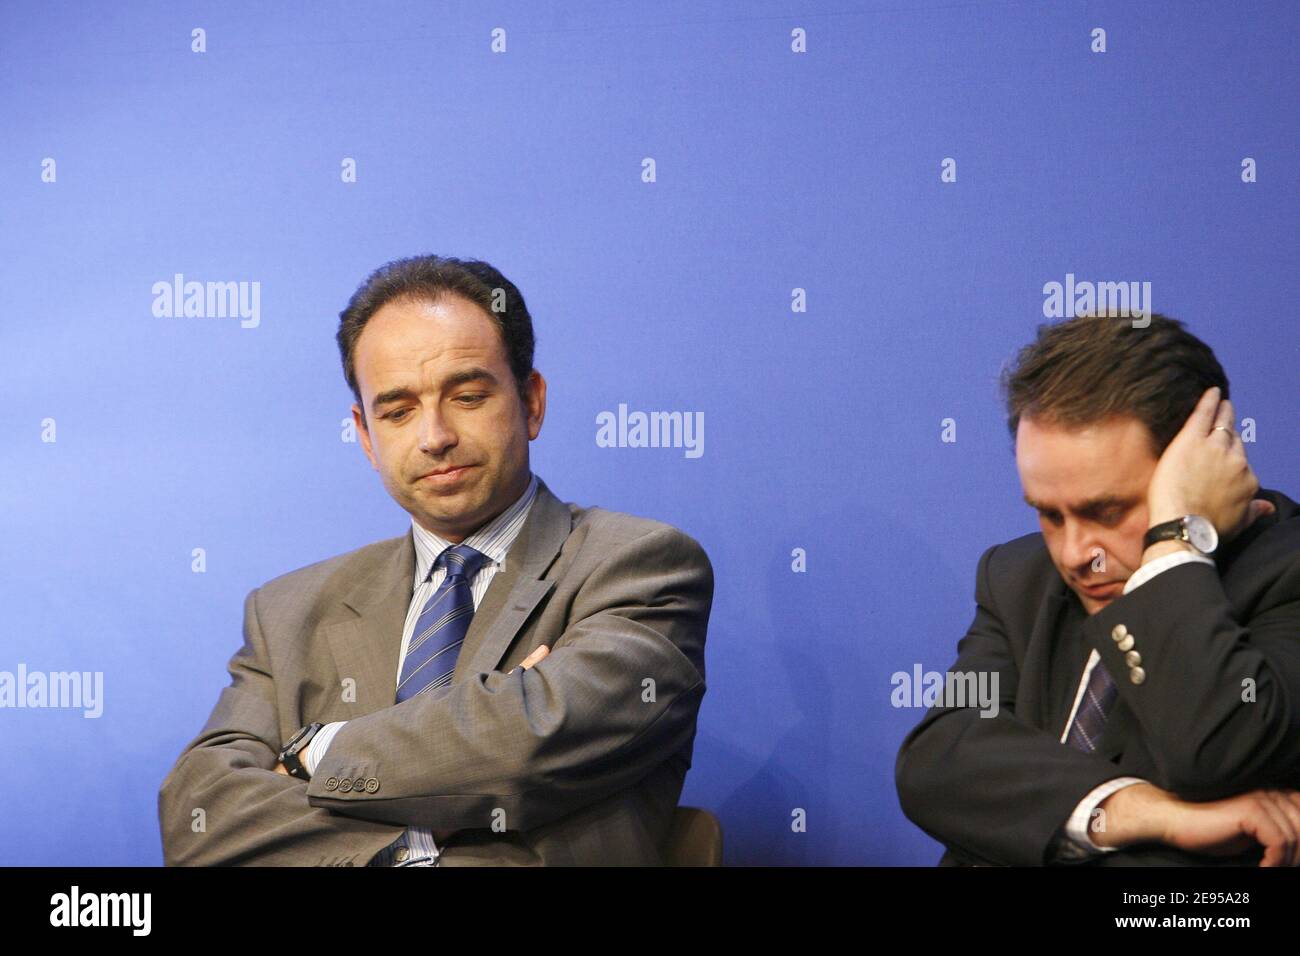 Jean-Francois Cope, Minister Delegate for the Budget and Administration Reform, and Xavier Bertrand, Minister for the Health and Solidarity present plans to reduce the country's massive debt during a meeting on public finances in Paris, France, on January 12, 2006. Photo by Mehdi Taamallah/ABACAPRESS.COM Stock Photo